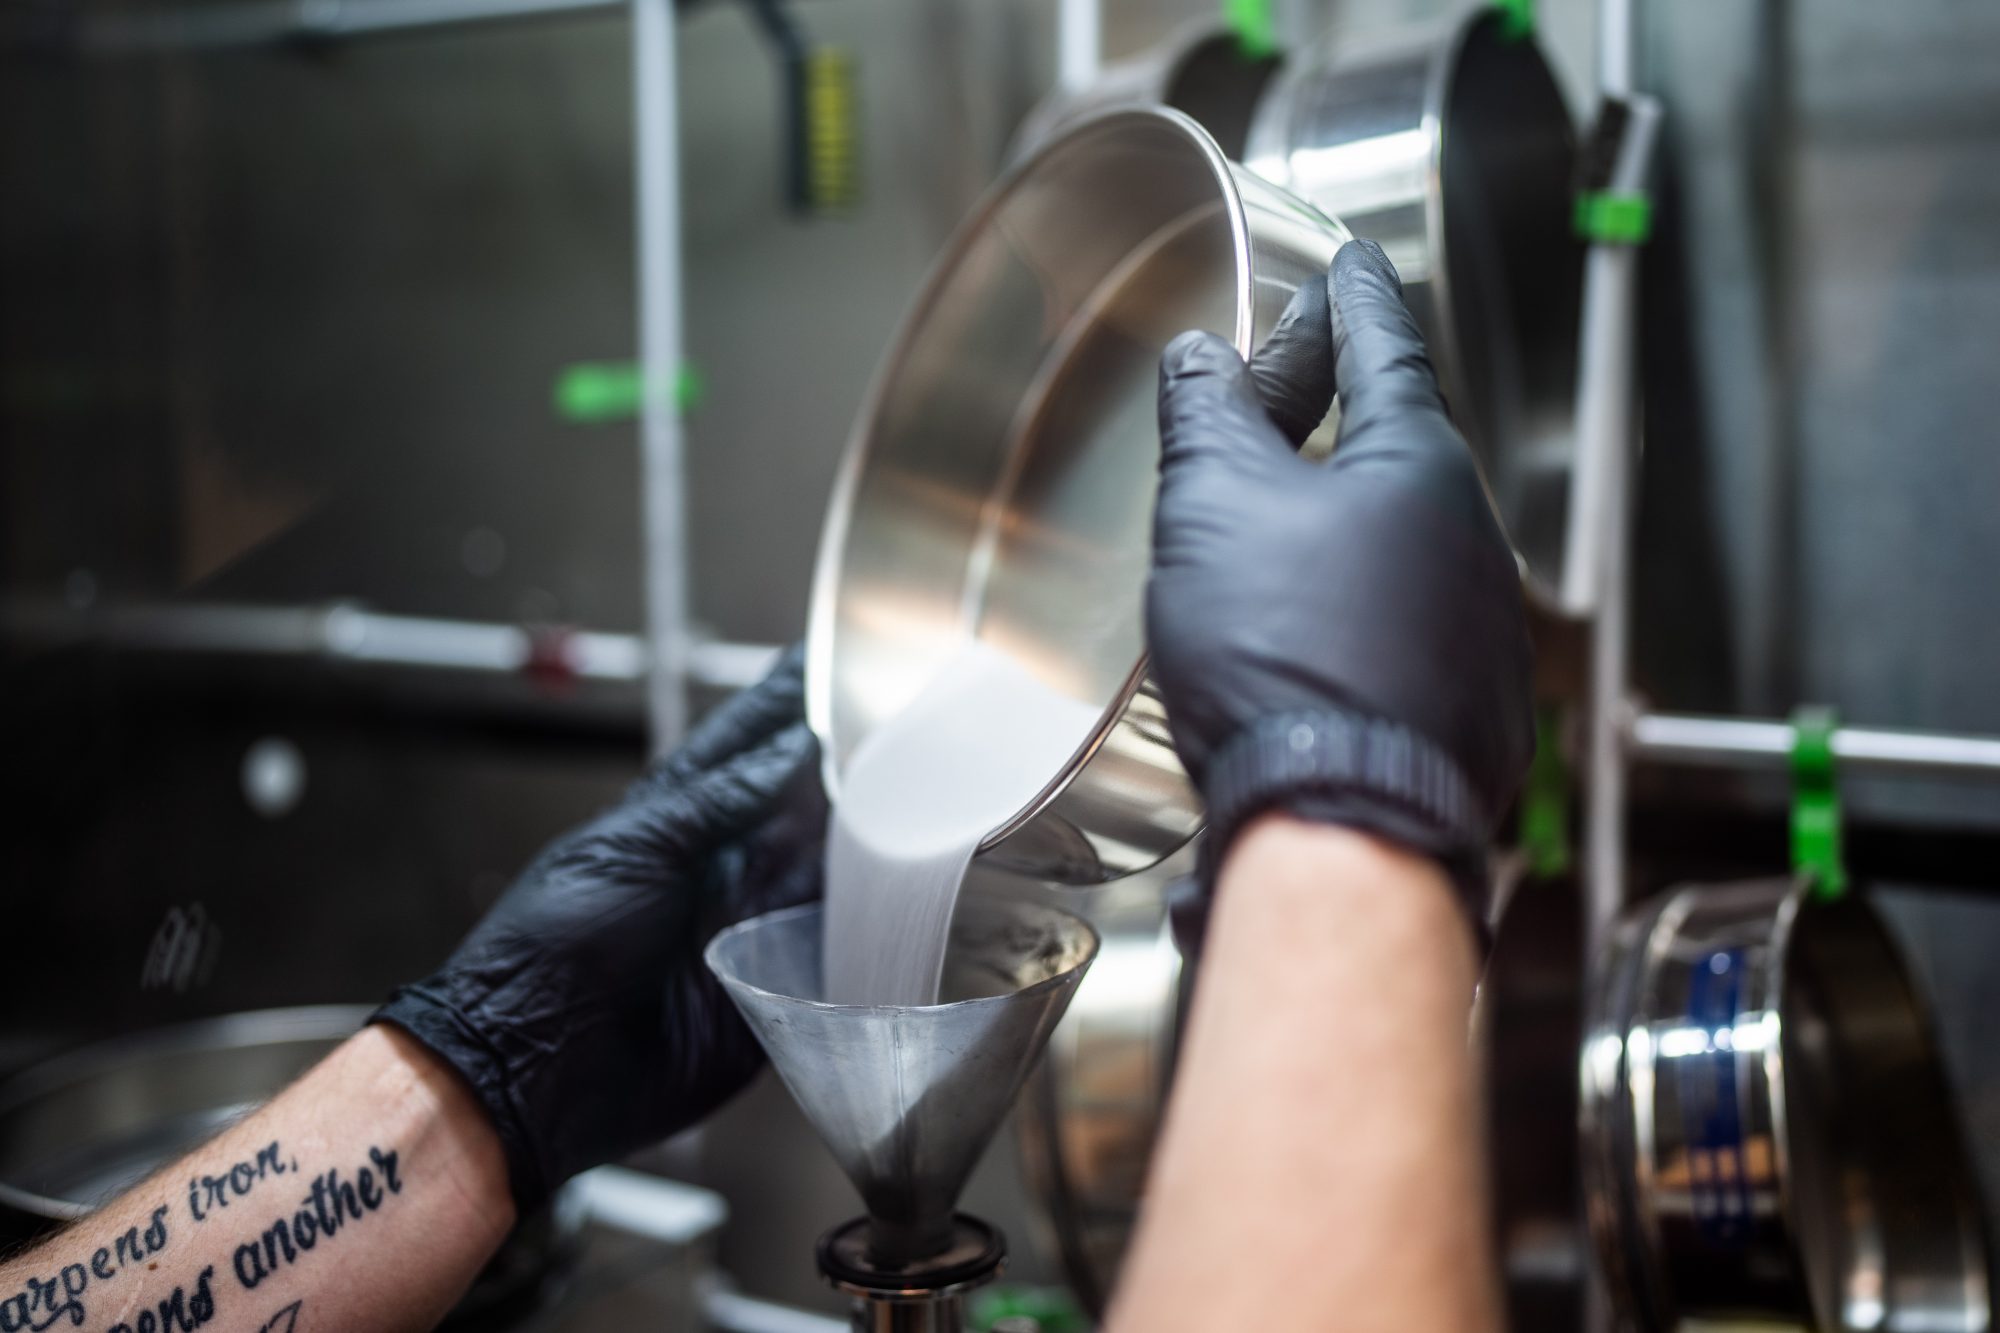 Levi Van Bastian fills a hopper with rammaterial to print on the LENS machine on Dec. 21, 2022, allowing the ability to test 3D print new superalloys.